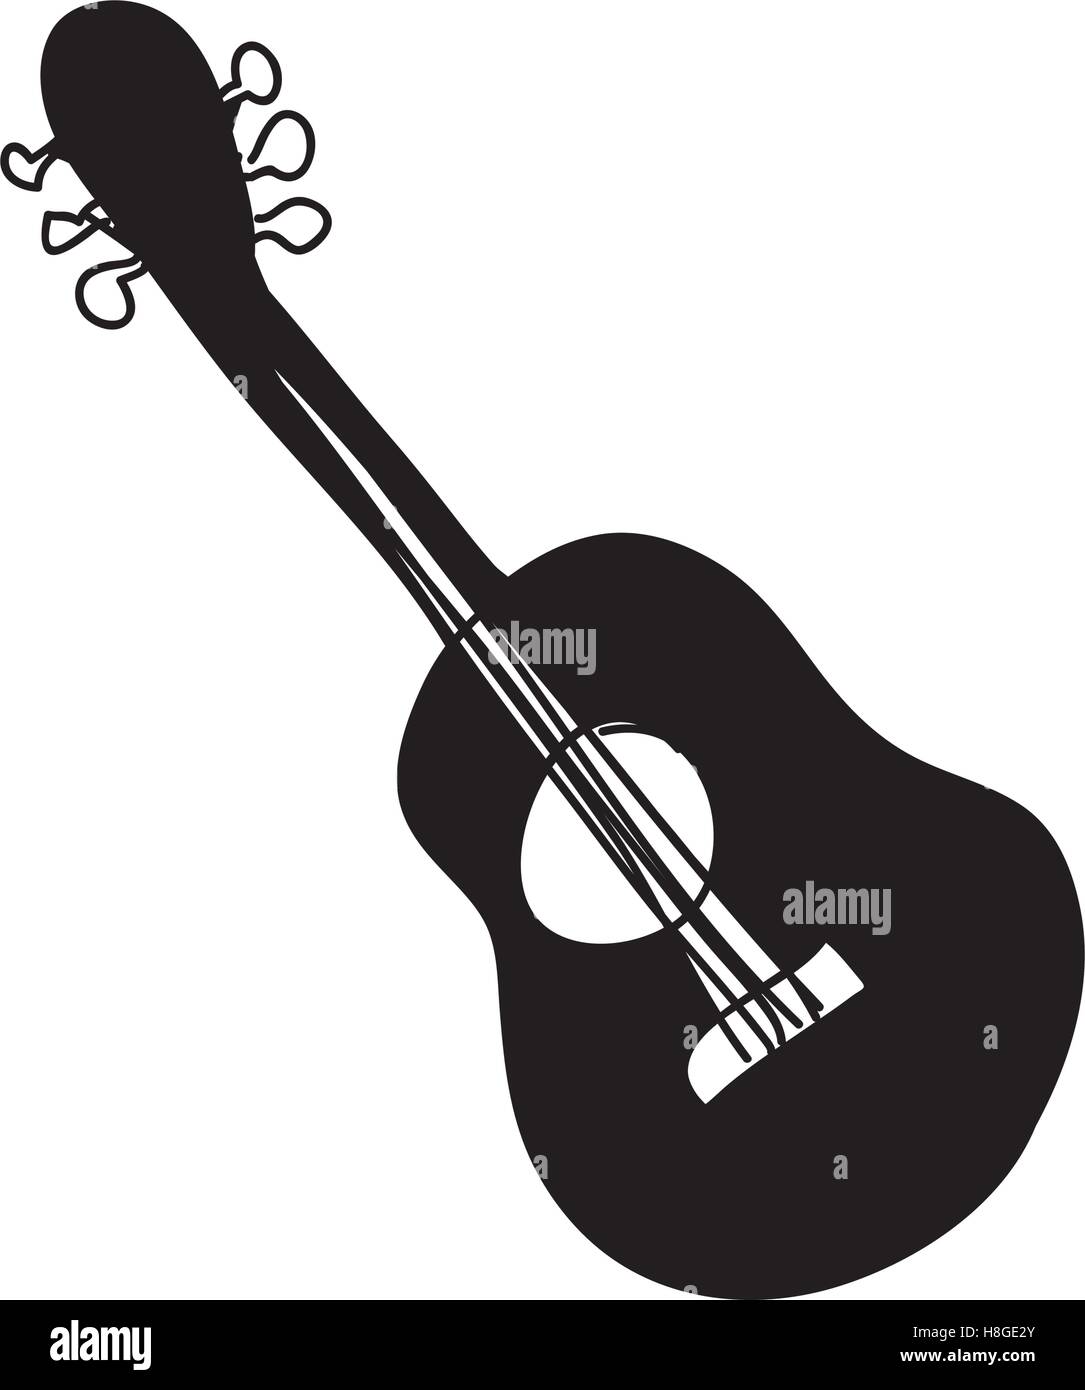 acoustic guitar instrument icon image vector illustration design Stock Vector